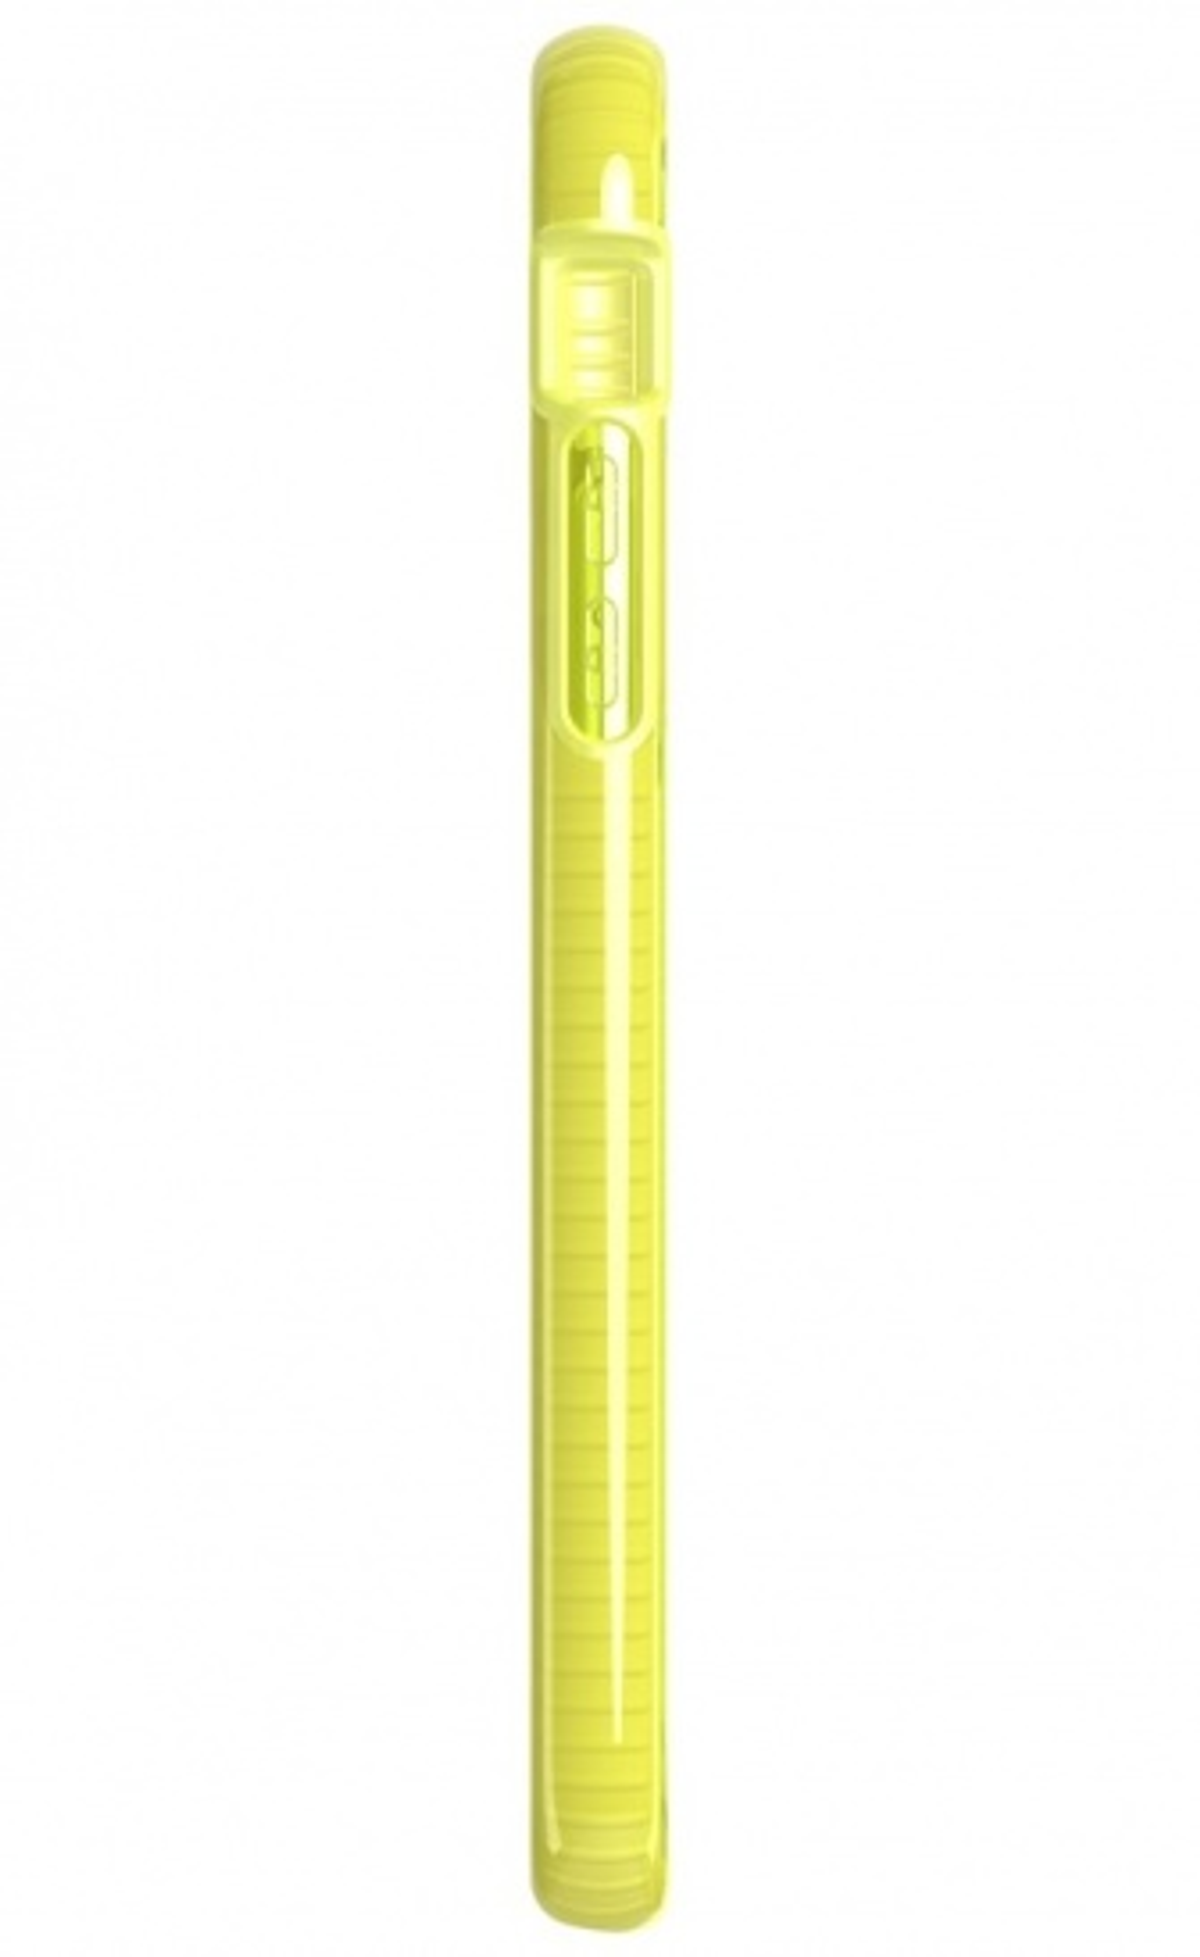 IPHONE CHECK NEON T21-6517 - TECH21 EVO XR iPhone FOR YELLOW, Rot Apple, Bumper, XR,